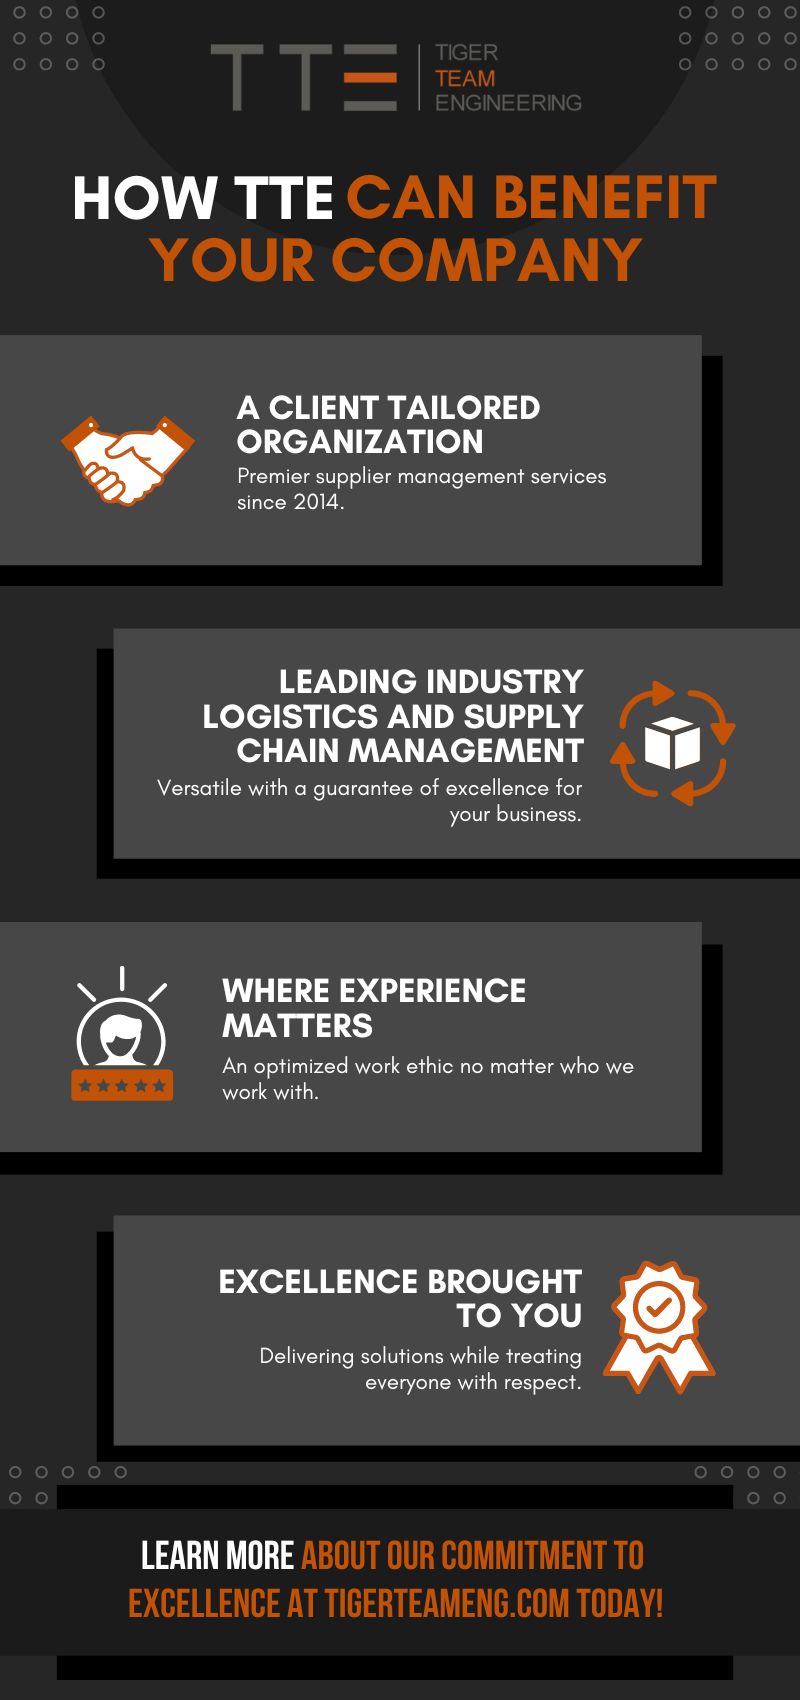 Infographic - How TTE Can Benefit Your Company - Tiger Team Engineering